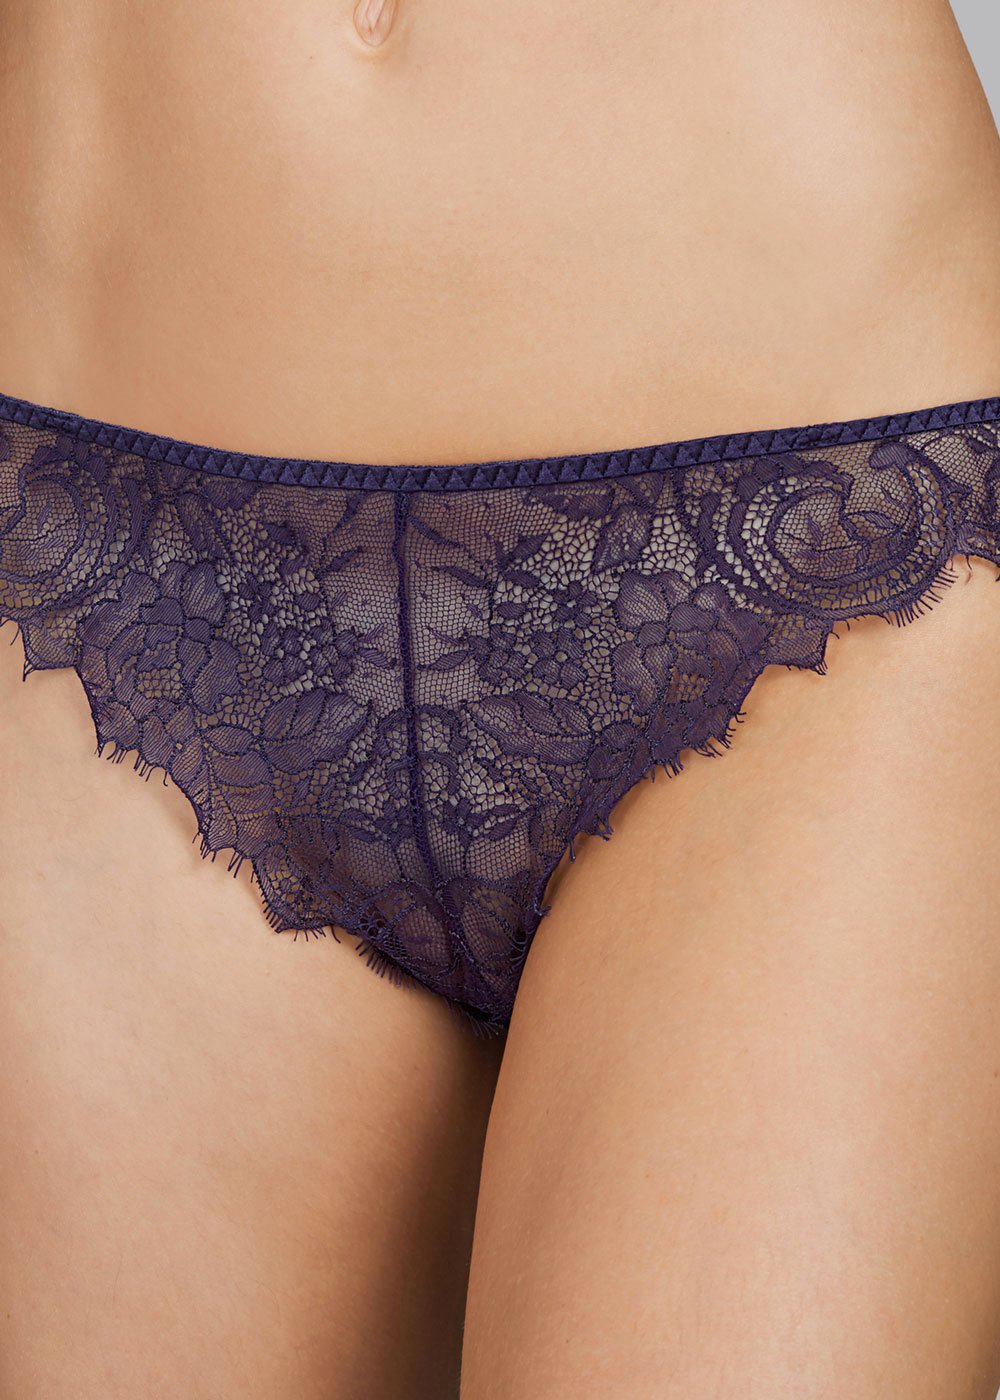 String Sduction Andres Sarda Nuit